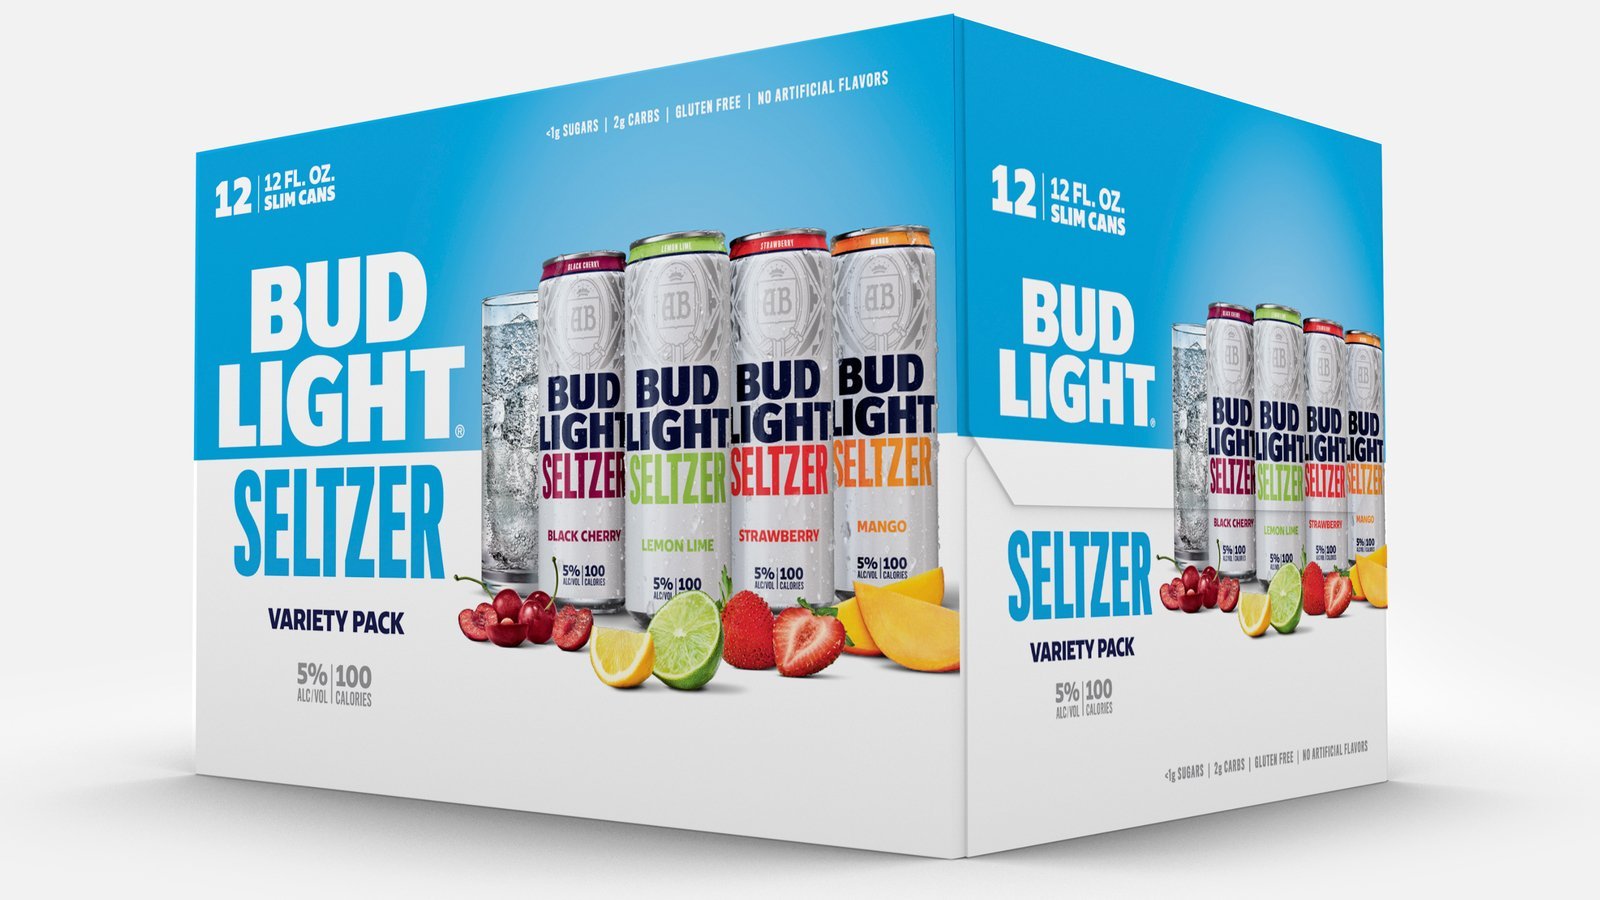 Bud Light Seltzer one of the country’s topselling hard seltzer